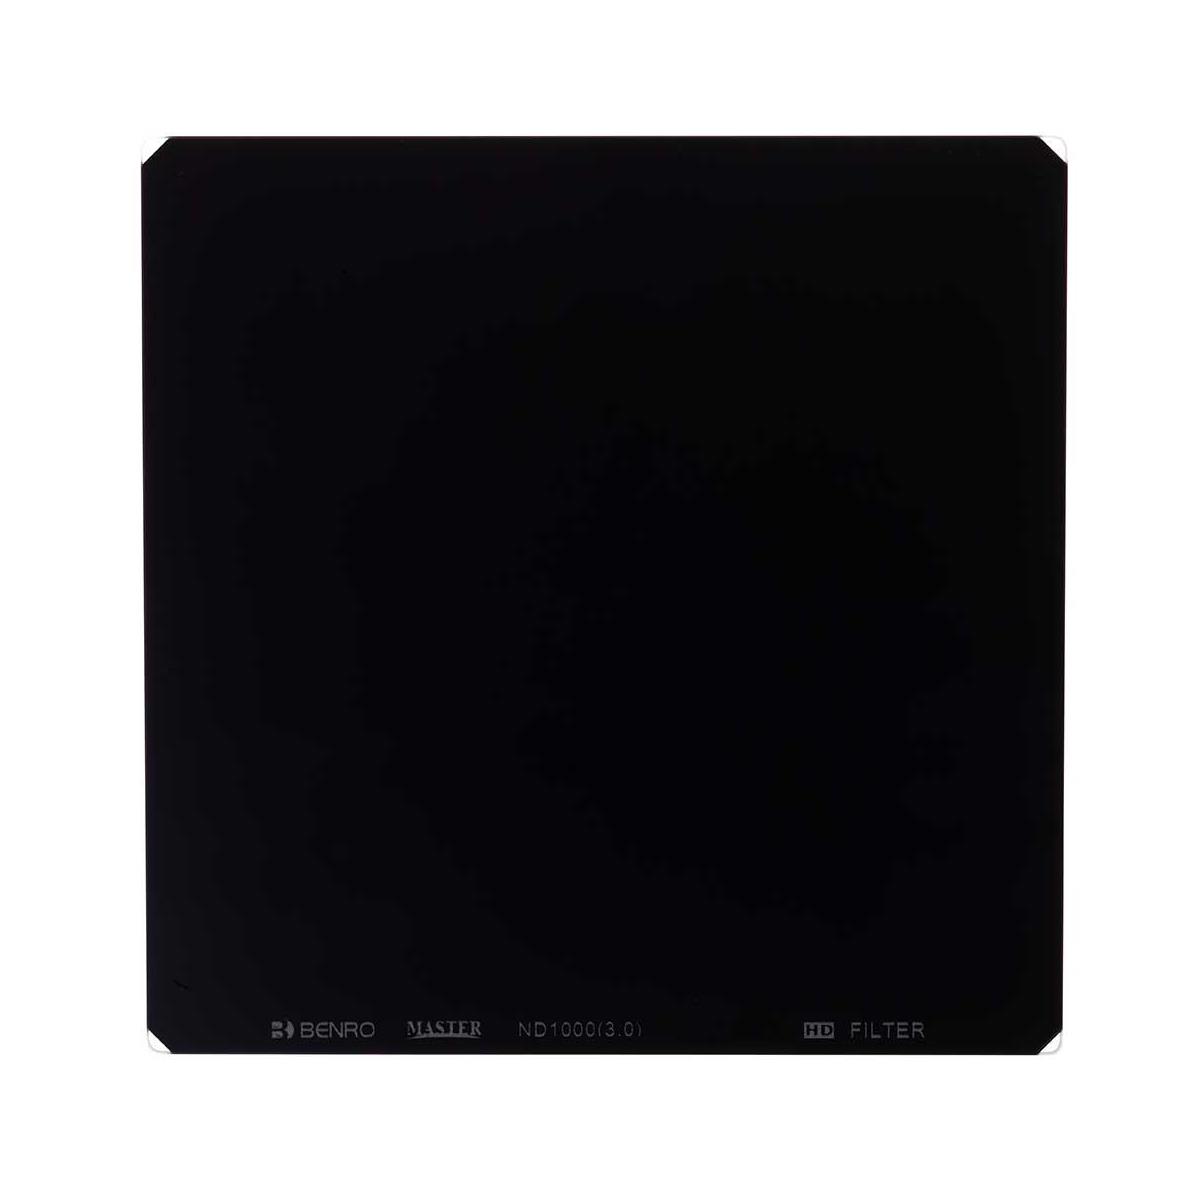 Image of Benro Master ND1000 (3.0) 170x170mm Neutral Density Square Filter